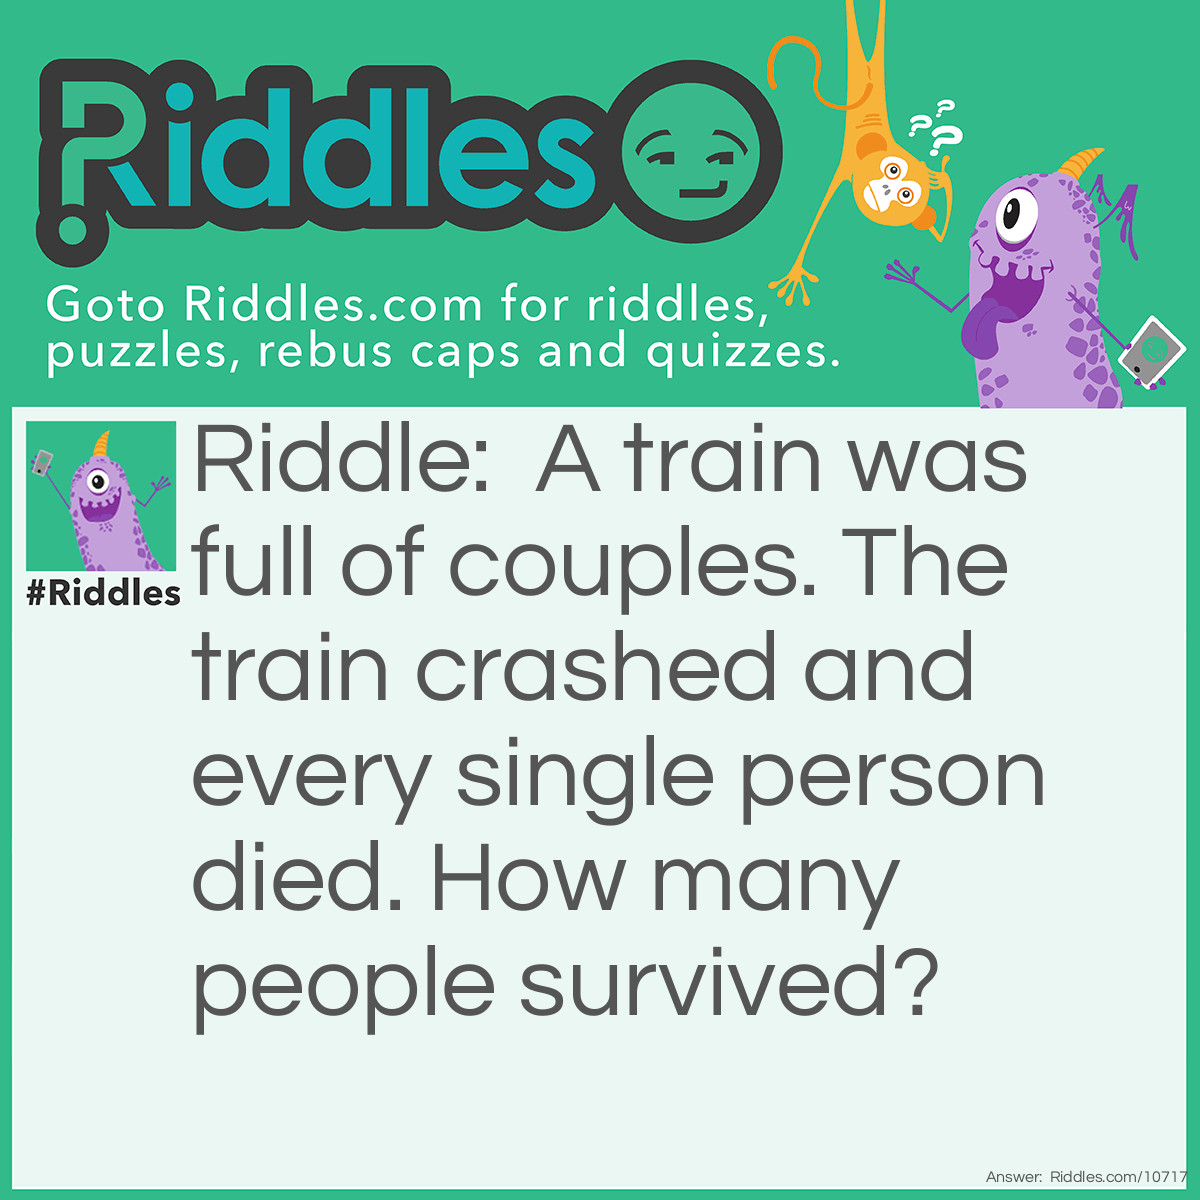 Riddle: A train was full of couples. The train crashed and every single person died. How many people survived? Answer: Everyone, there were only couples on the train, no singles.